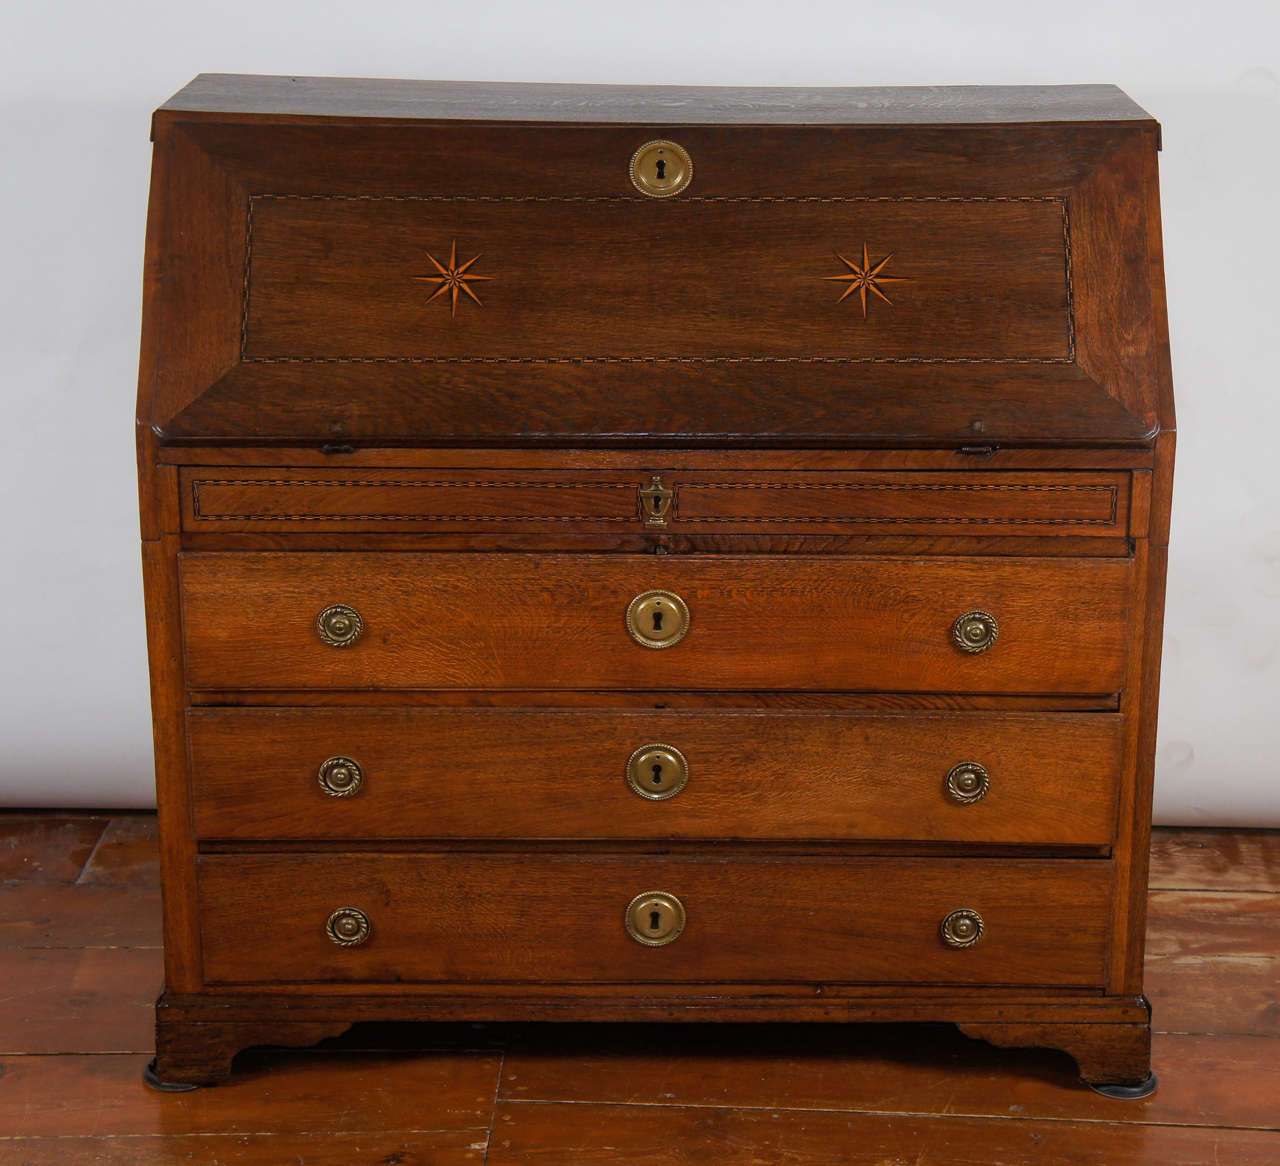 Wonderful Friesian solid oak bureau having dual compass star and string-band inlaid fall front enclosing a fitted inlaid interior of pigeon-holes and drawers with a secret drawer enclosed within a slide and carved bone inscription plaque and pulls,